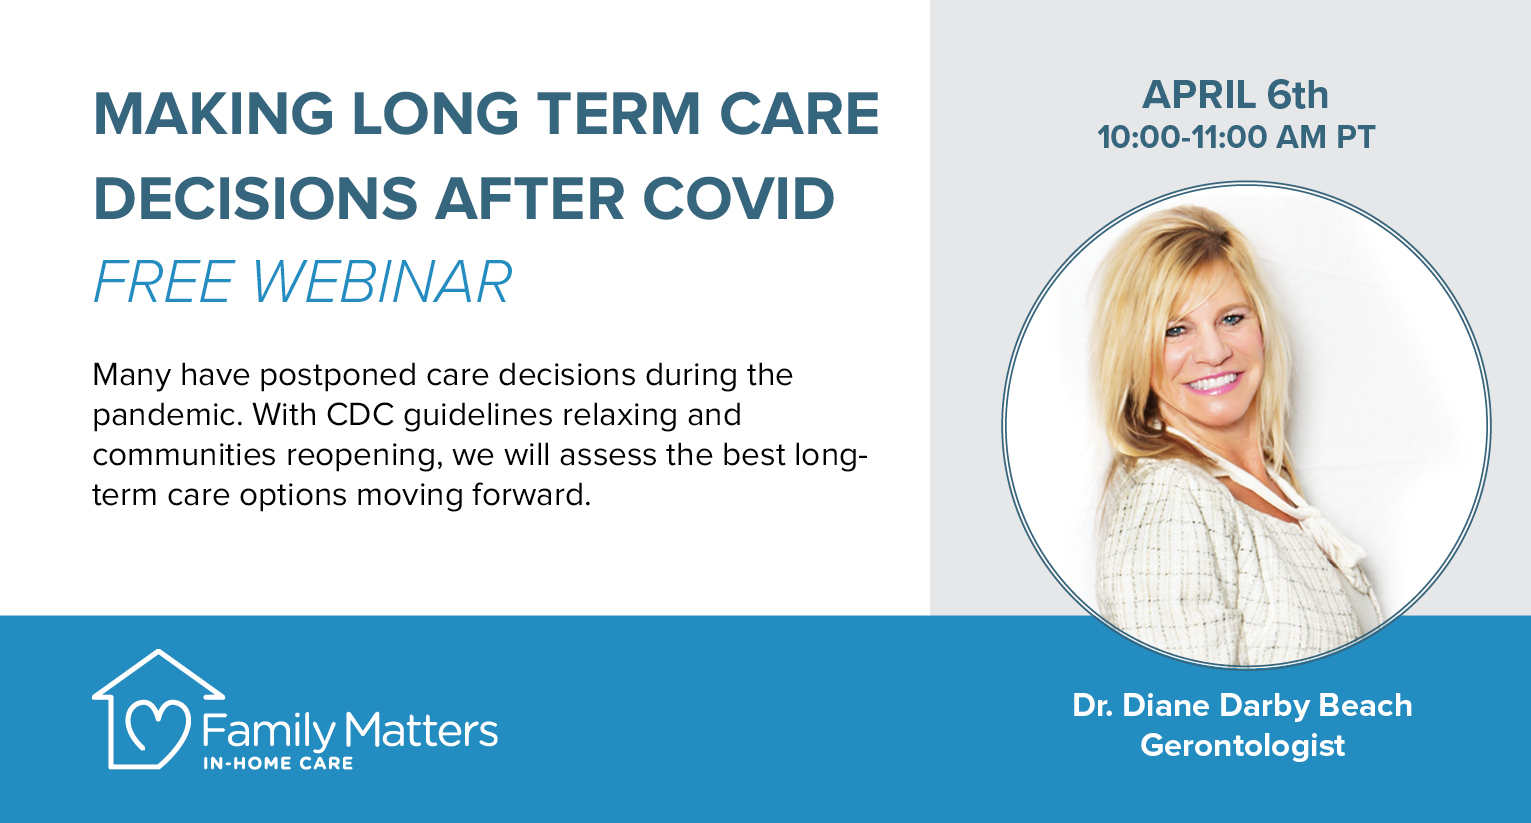 Free Webinar: Making Long Term Care Decisions After COVID